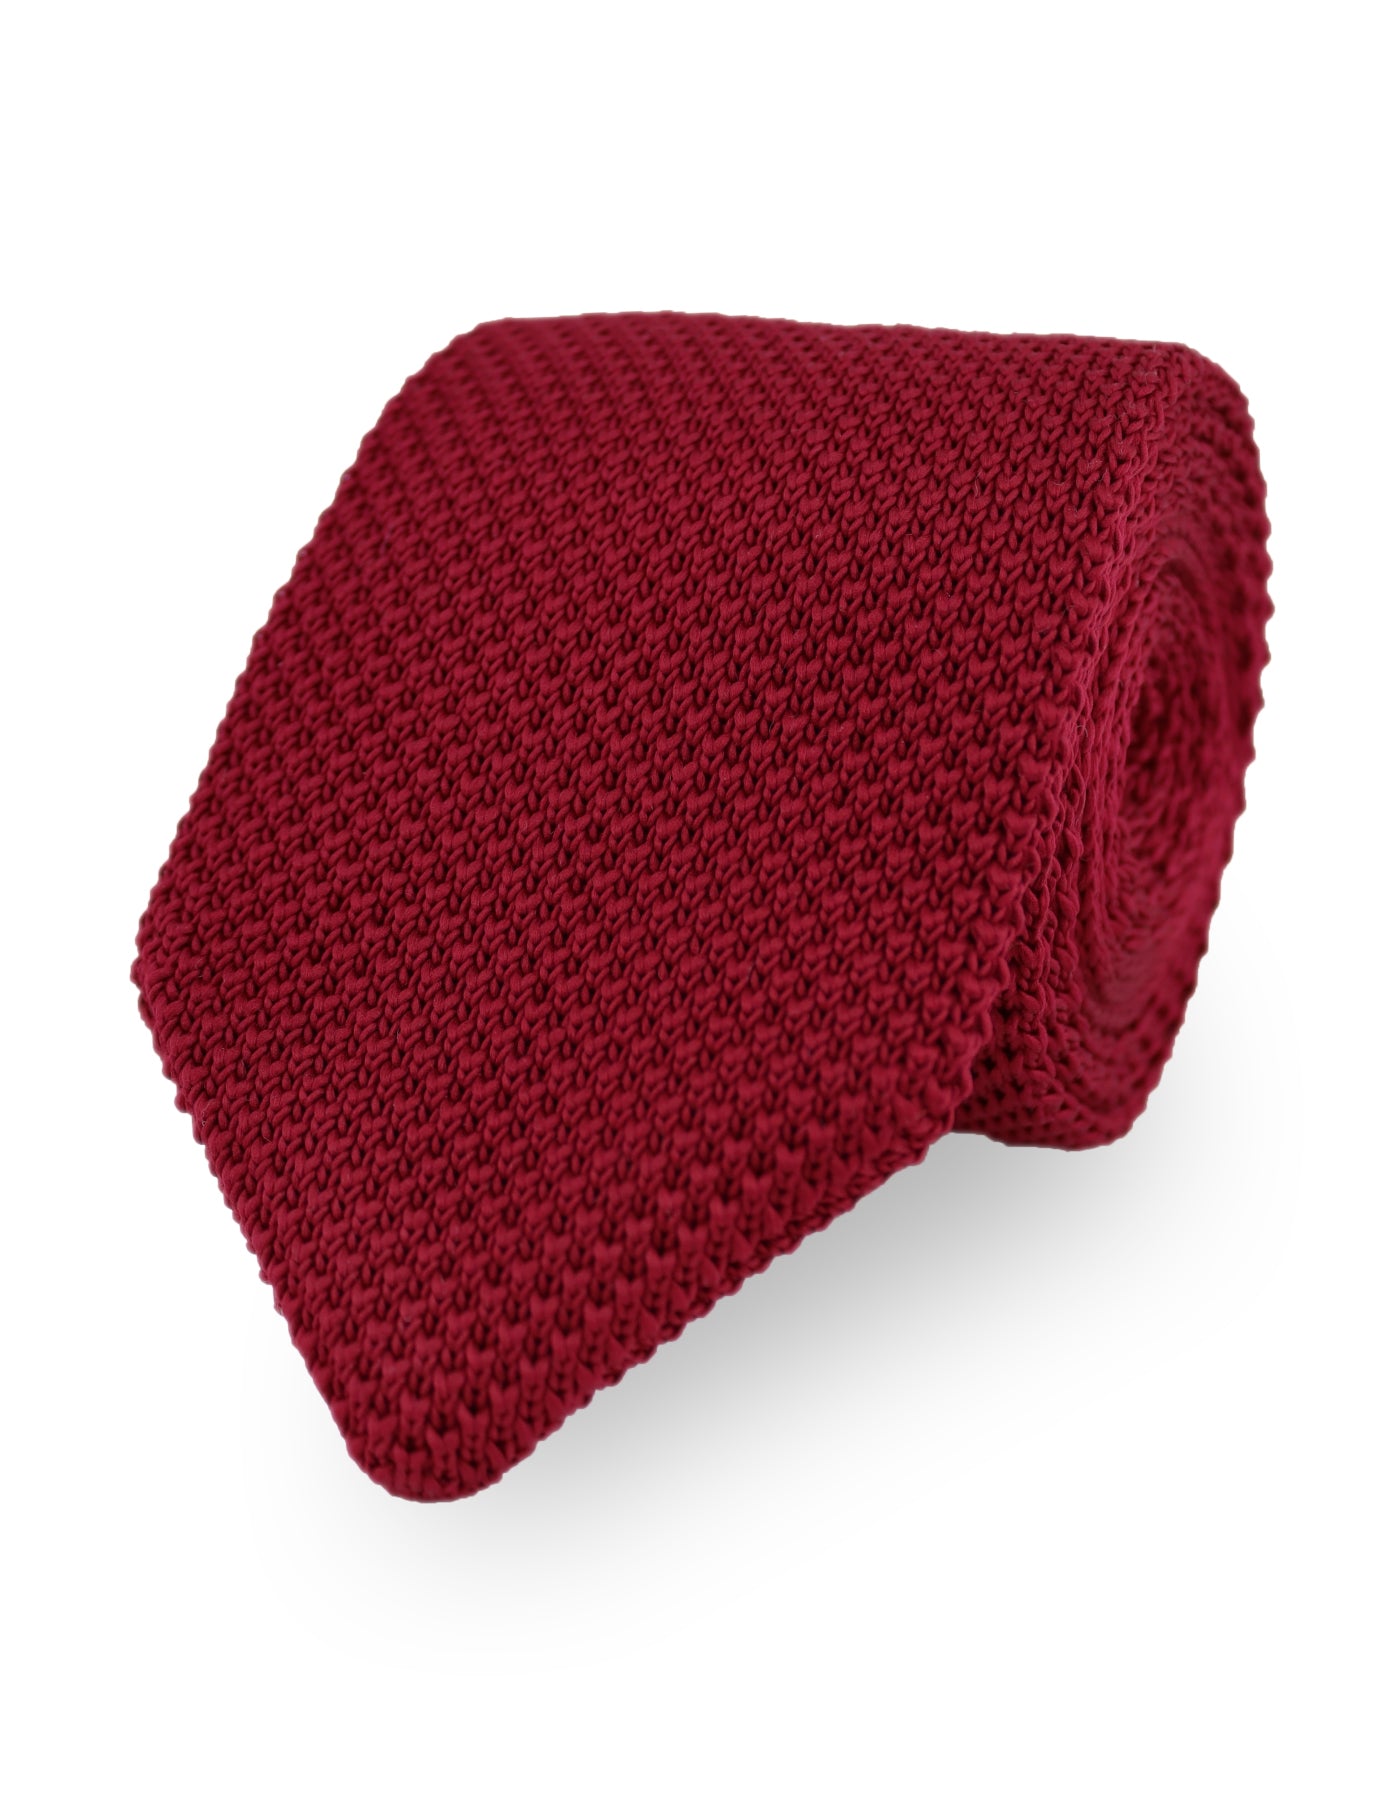 100% Polyester Knitted Pocket Square - Red